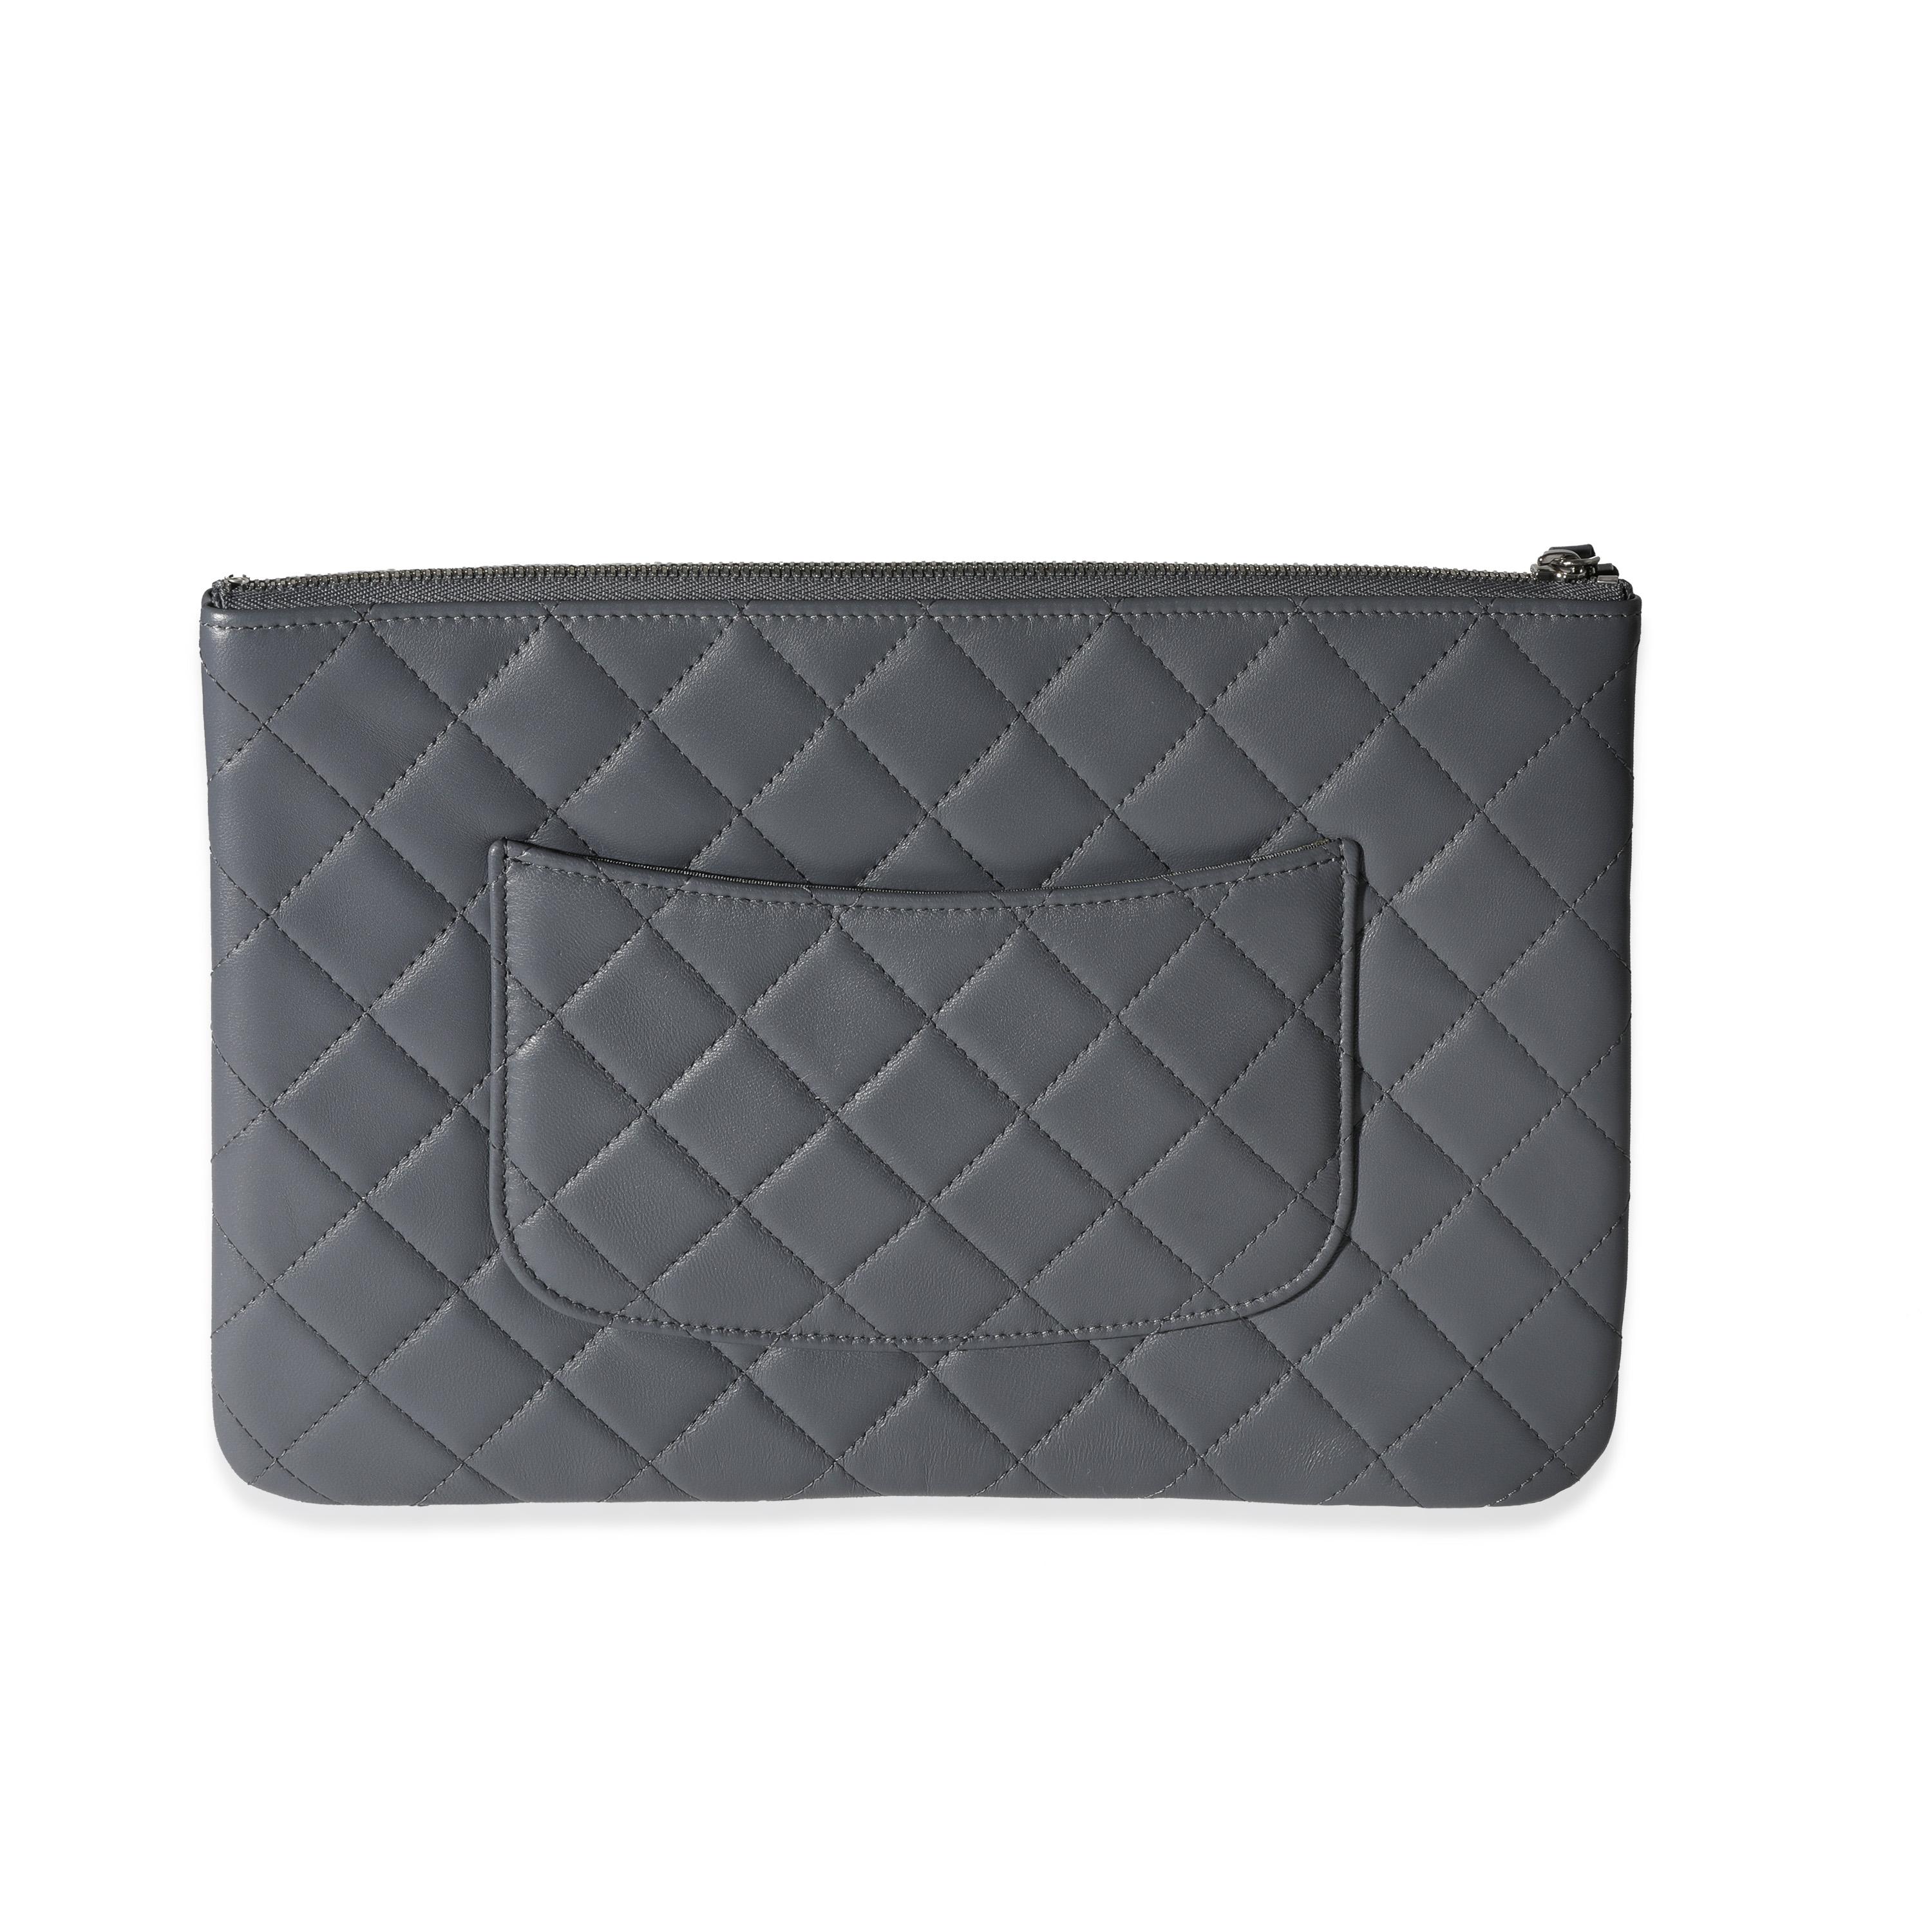 Listing Title: Chanel Multicolor Quilted Lambskin Multi-Pocket Zip Case
SKU: 117762
Condition: Pre-owned (3000)
Handbag Condition: Never Worn
Brand: Chanel
Model: Grey Multicolor Quilted Lambskin Multi Zip Pouch
Origin Country: Italy
Handbag